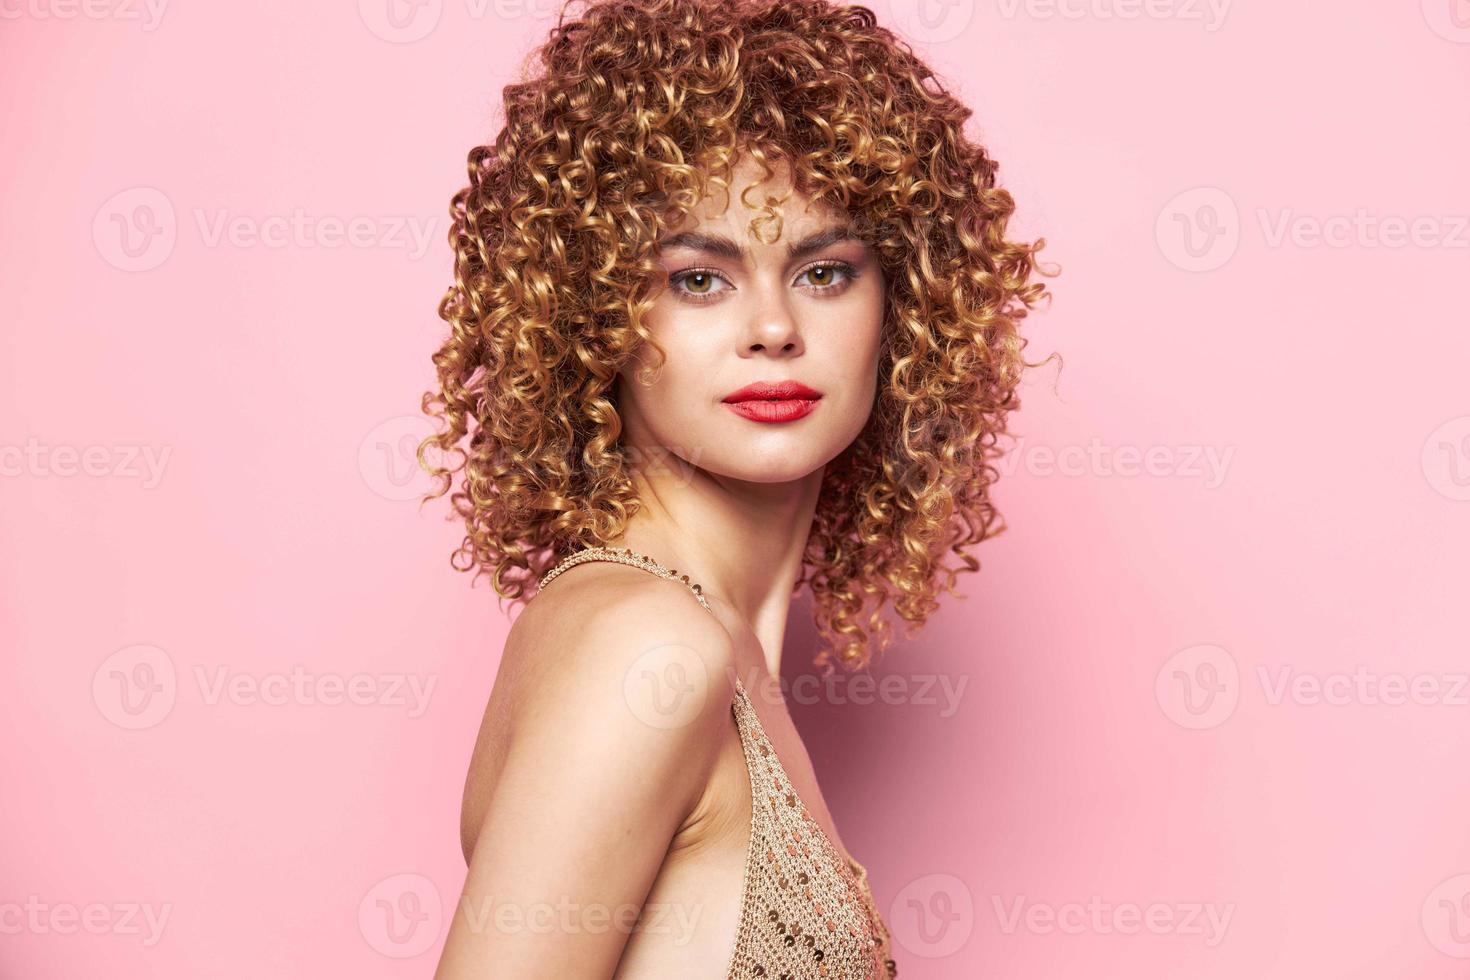 Attractive woman Curly hair makeup pink background bright makeup photo